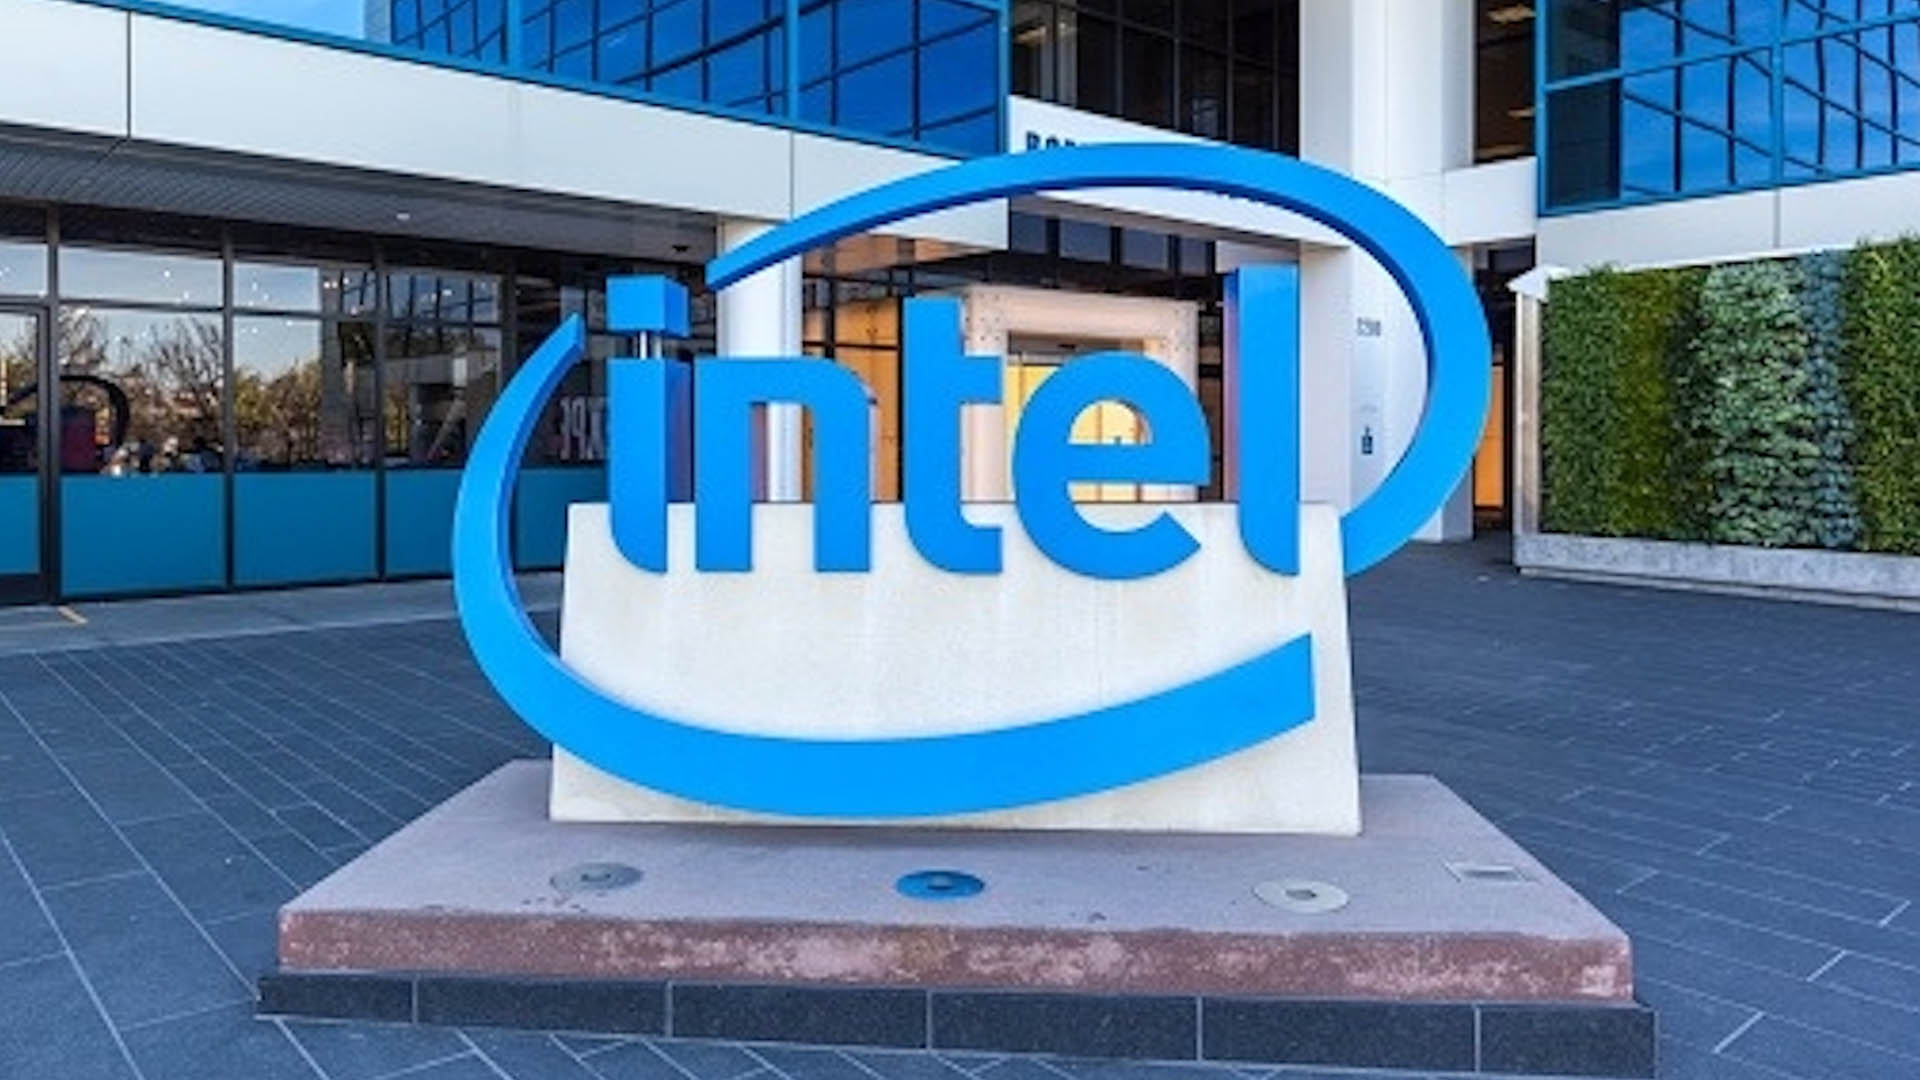 Intel collaborates with manufacturers in India for 'Make in India' laptops